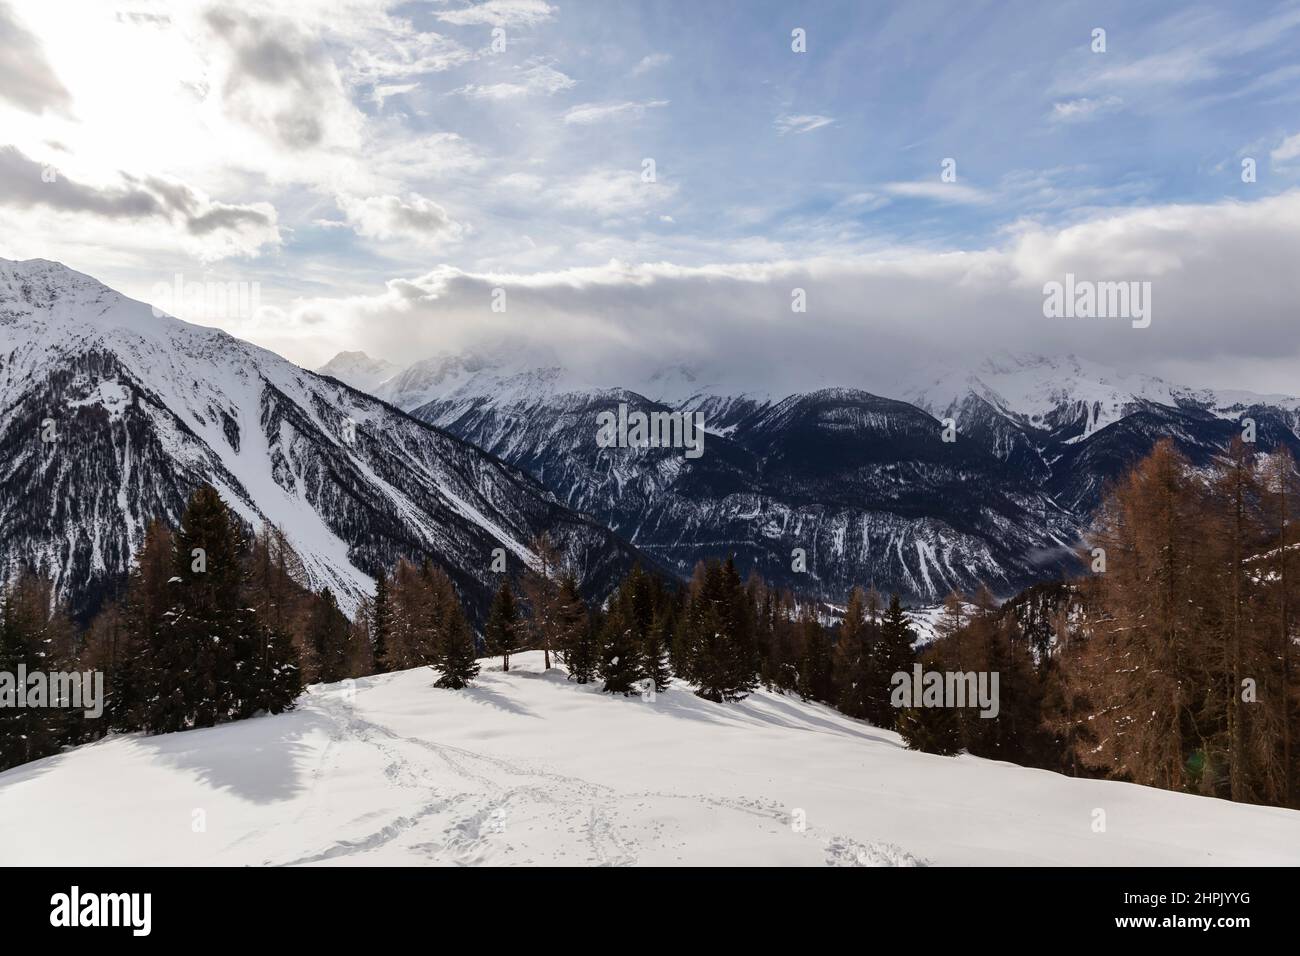 Winter scenery in the European Alps, Graubuenden, Switzerland, with snow-covered mountains, clouds, and sky Stock Photo